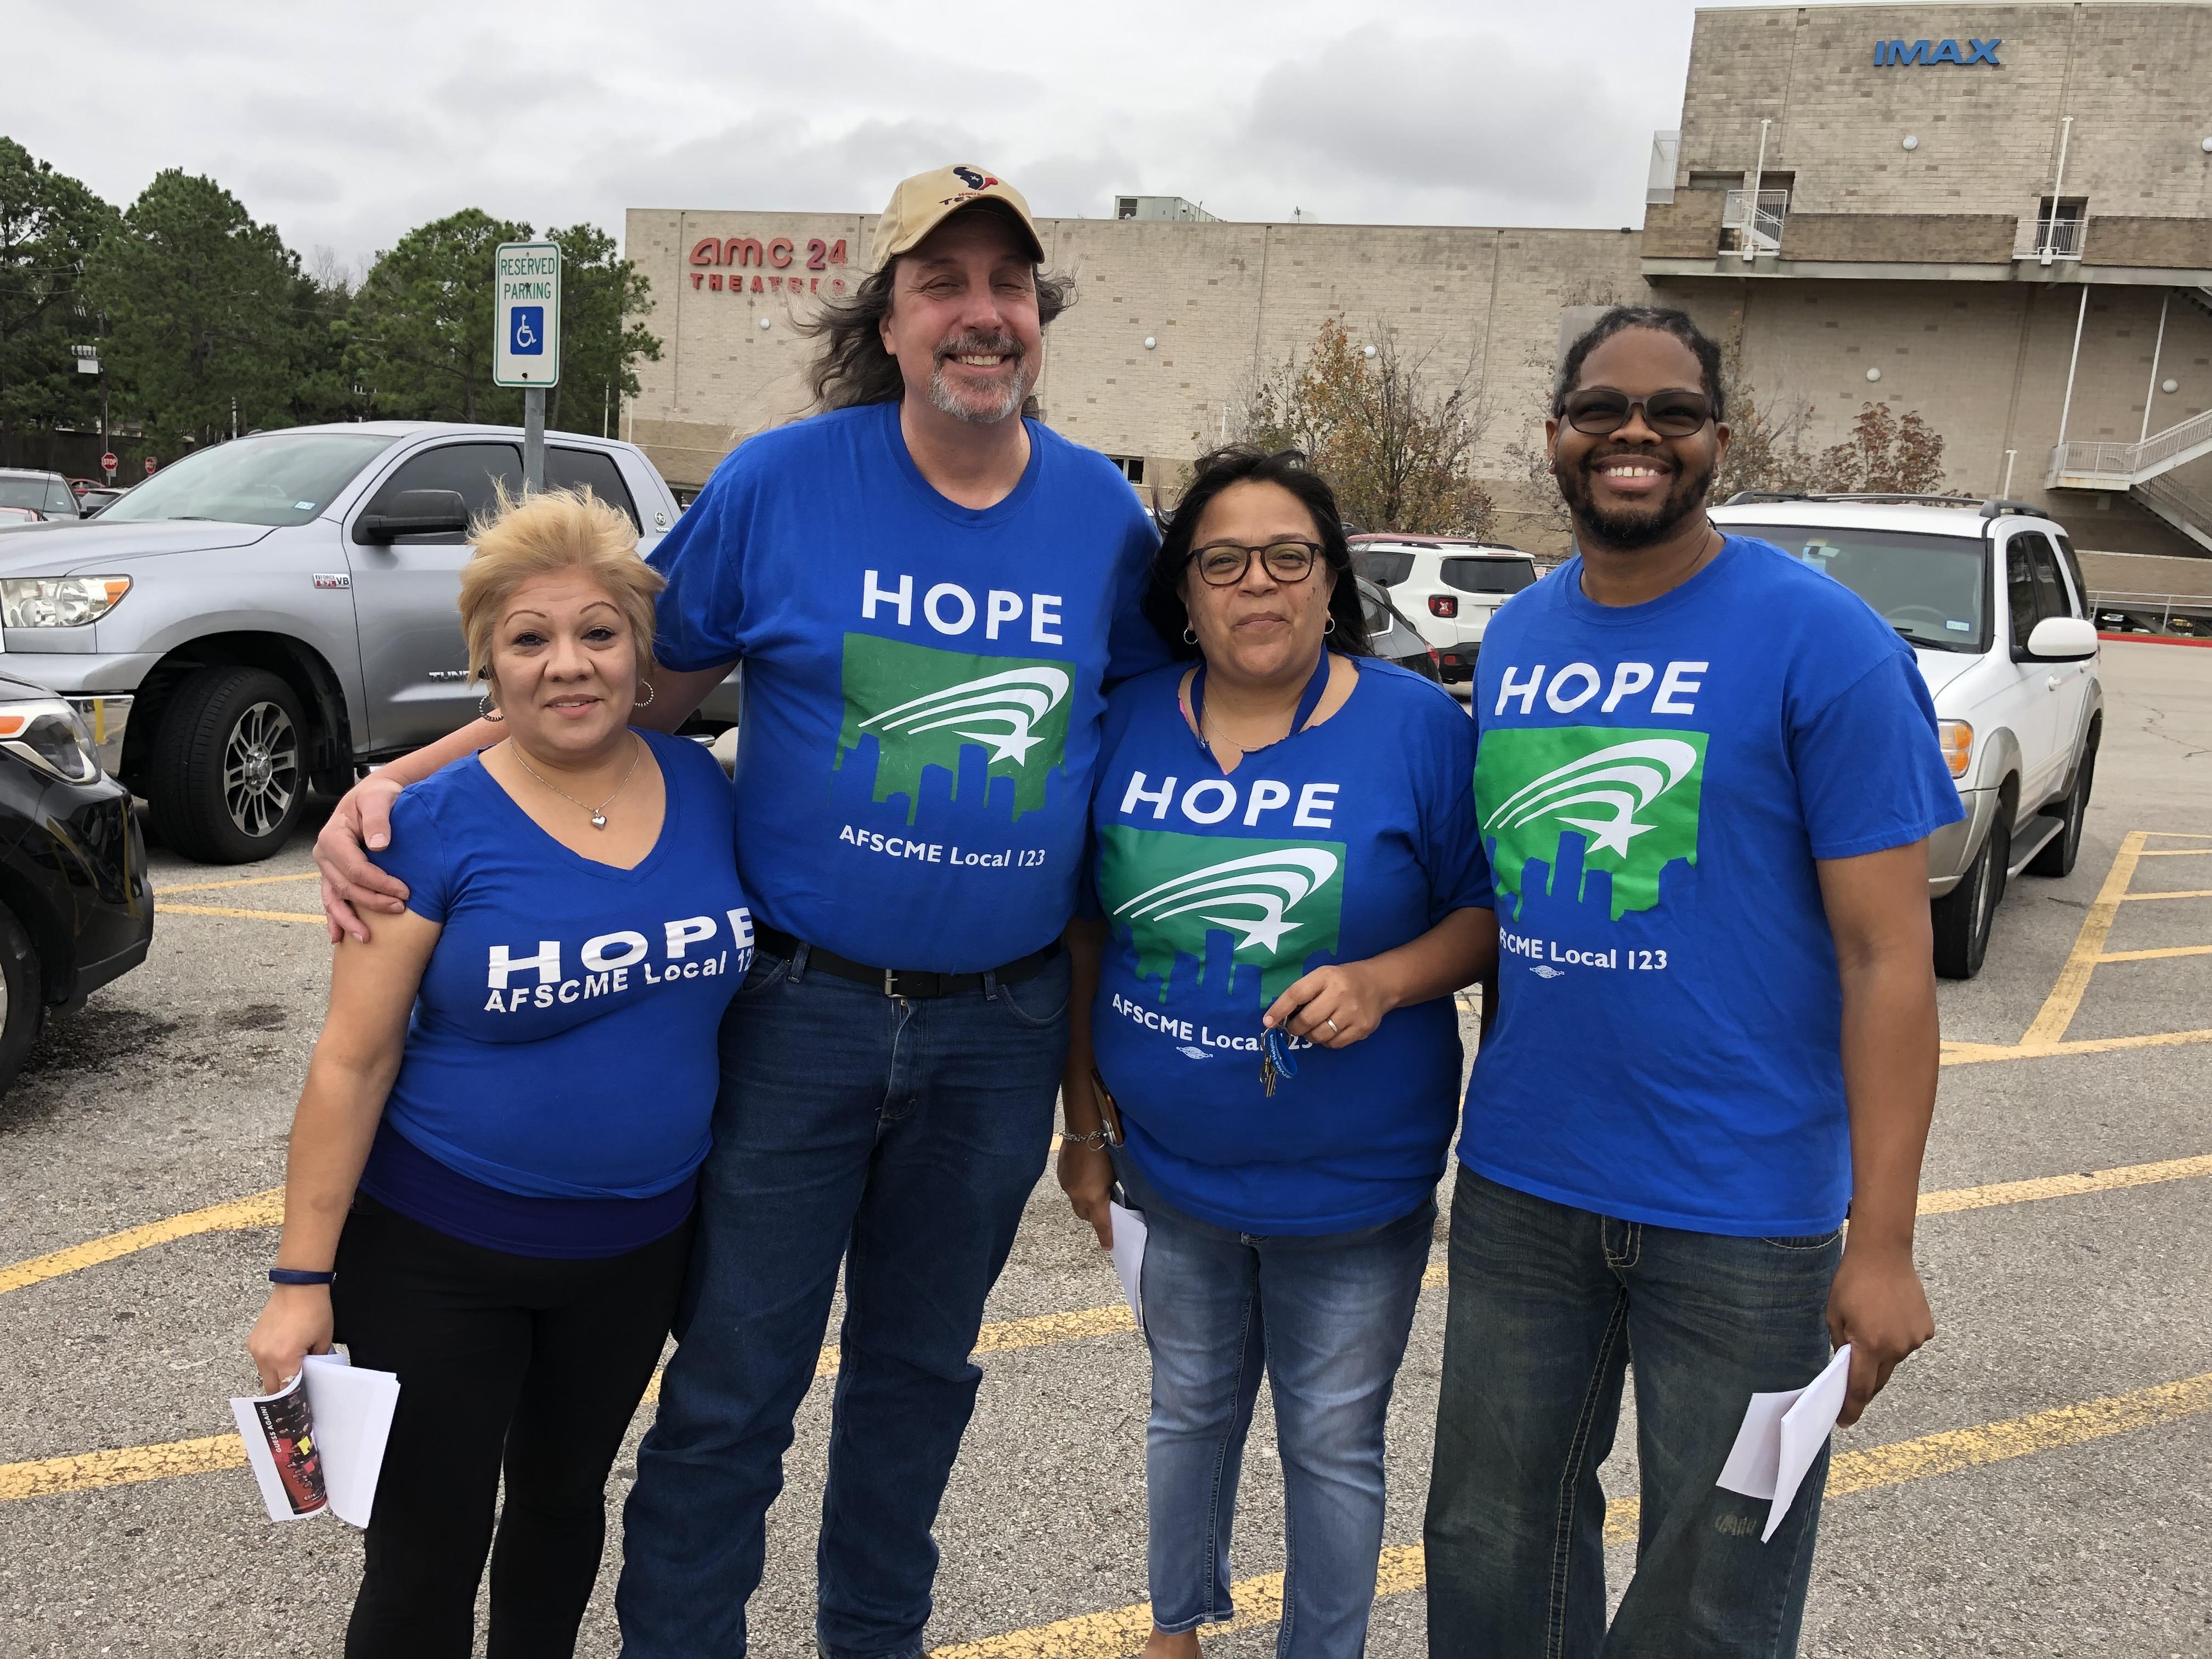 HOPE Members take action in support of AFSCME Members across the Country. Where we go one, we go all!